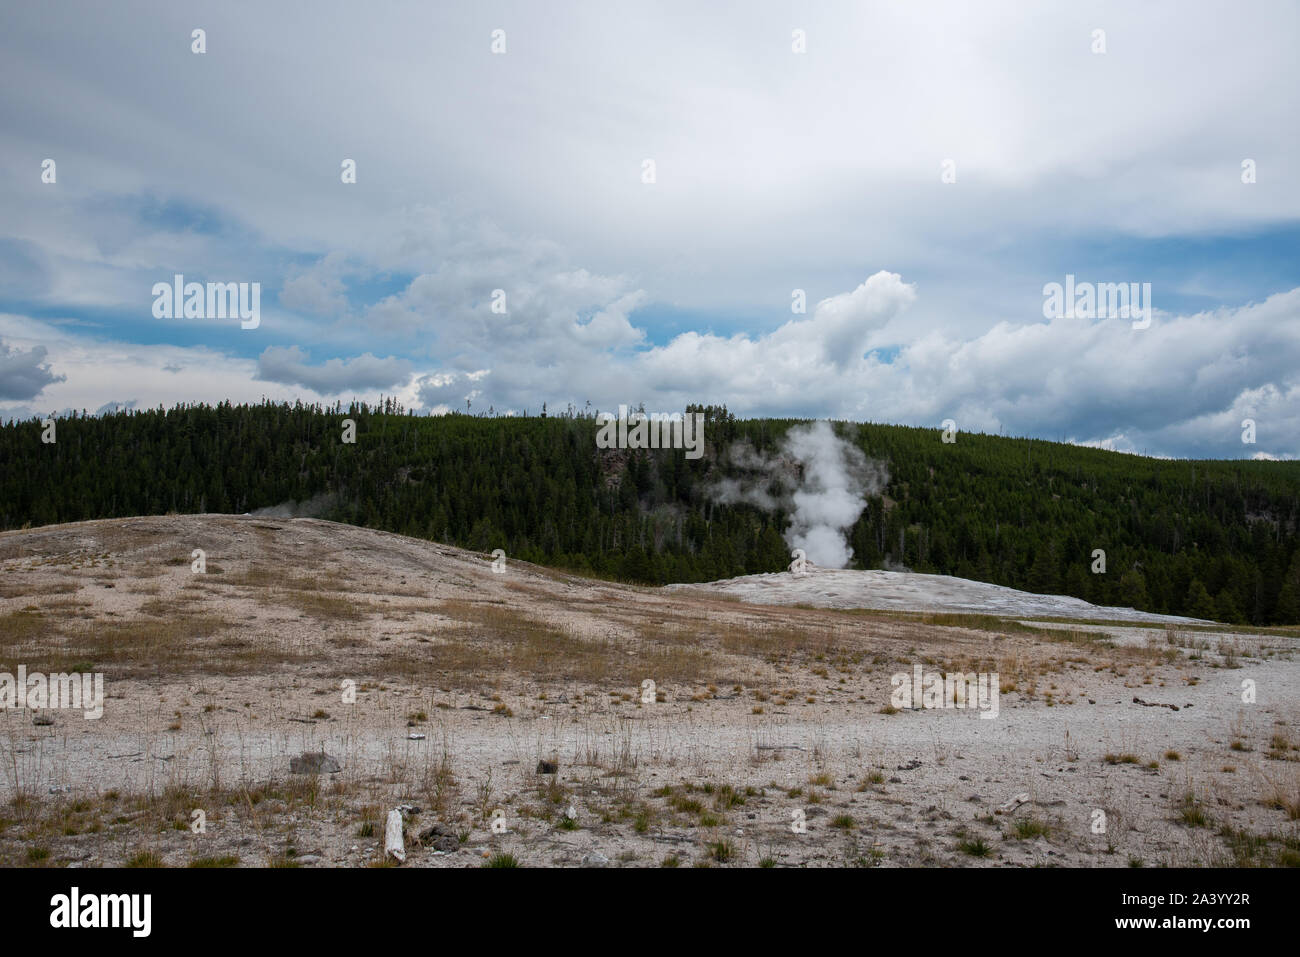 Old faithful geyser in Yellowstone national park steaming just before an eruption Stock Photo